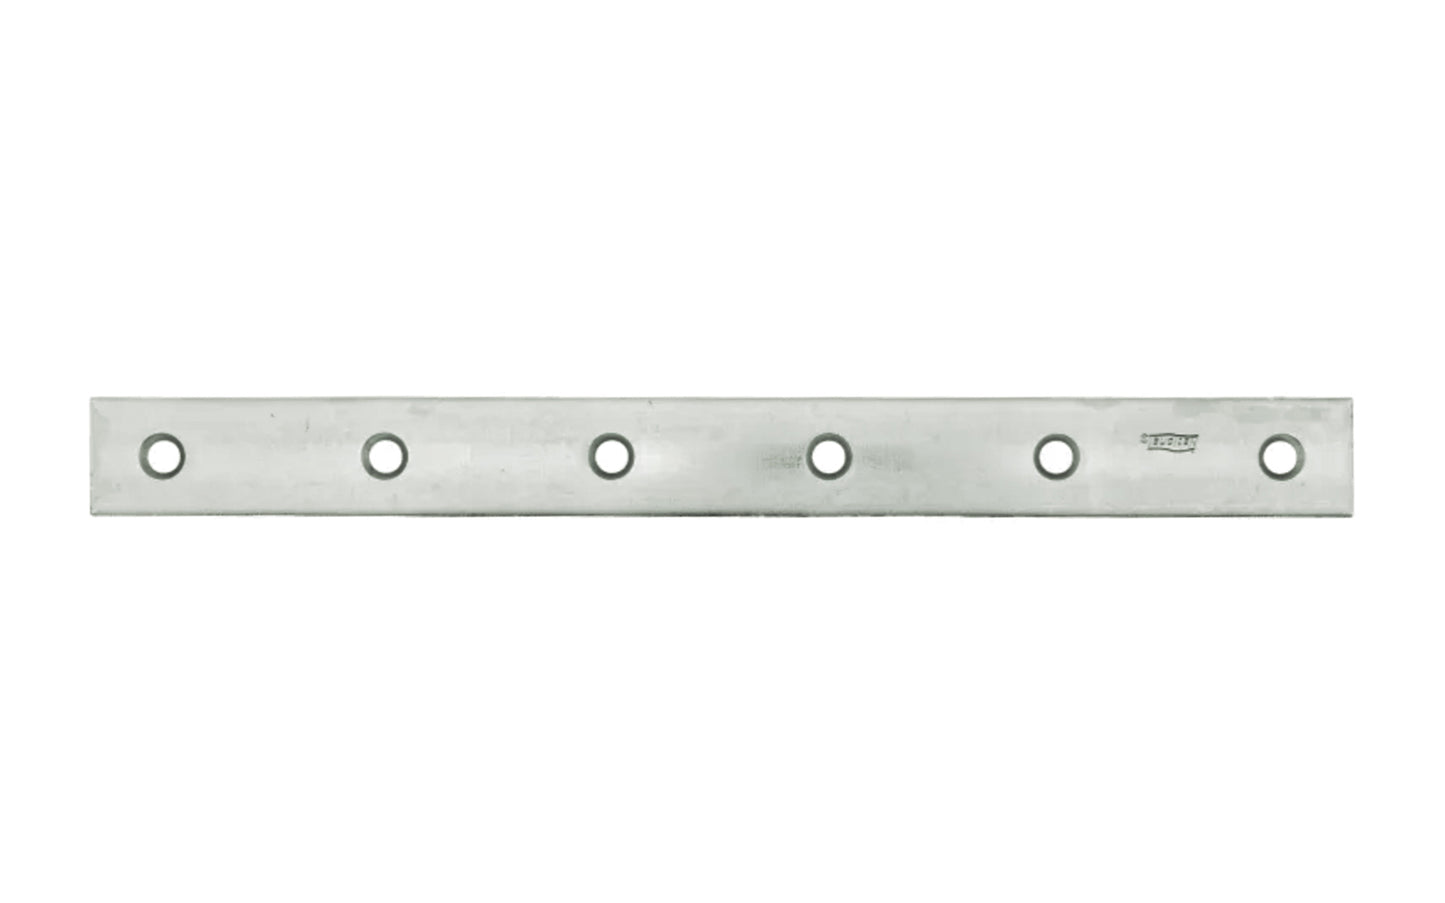 12" Zinc-Plated Mending Plate. These flat mending plate irons are designed for furniture, cabinets, shelving support, etc. Allows for quick & easy repair of items in the workshop, home, & other applications. Steel material with a zinc plated finish. Countersunk holes. 12" long size. National Hardware Model N220-335.